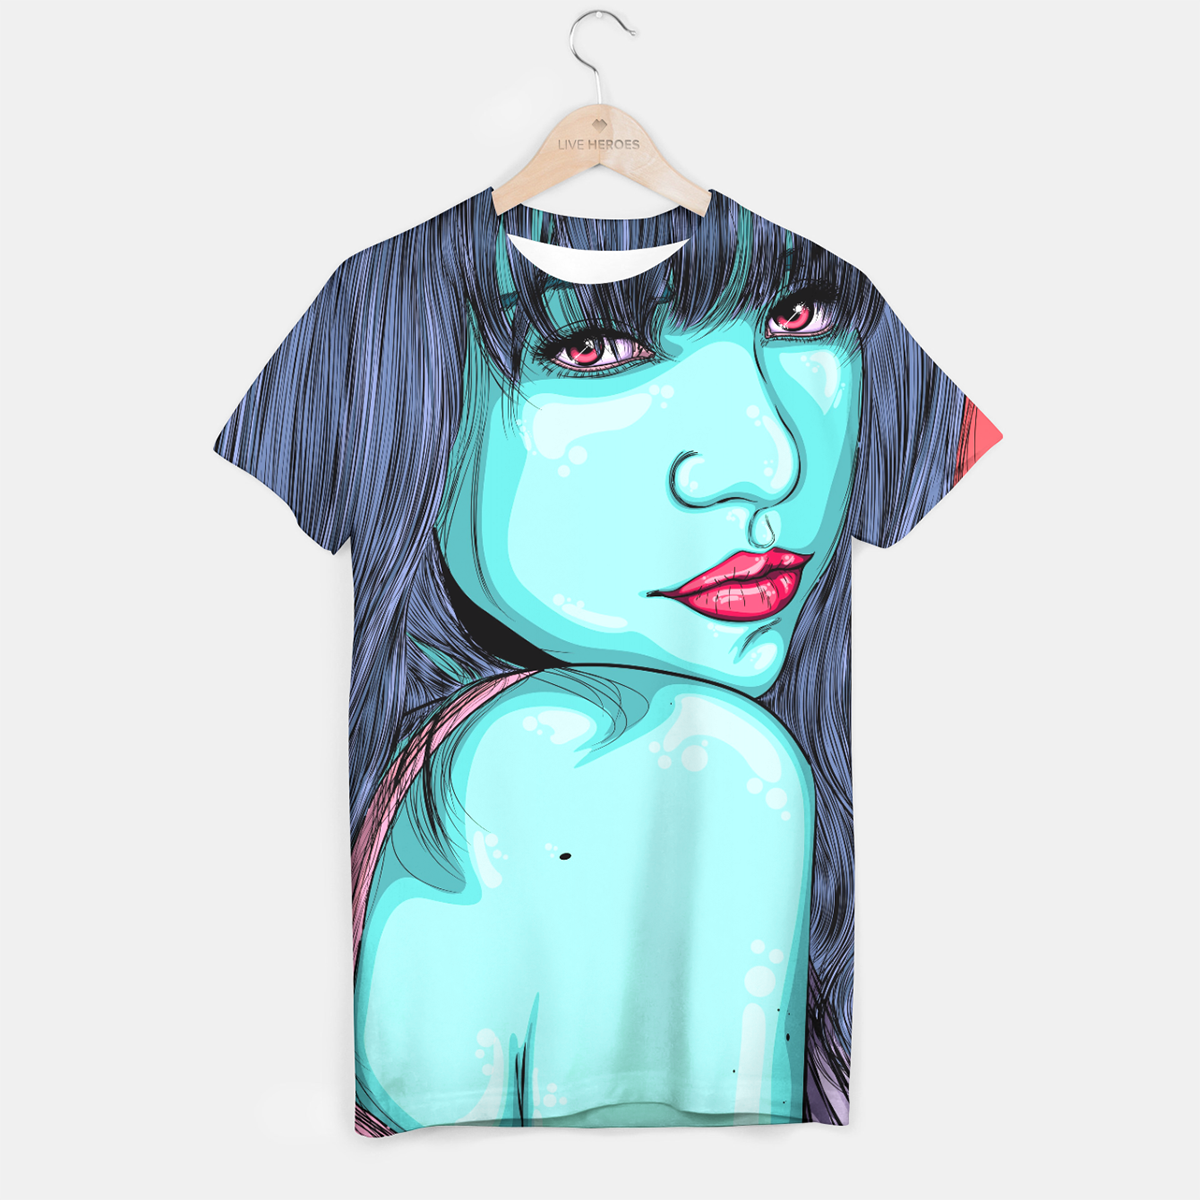 art ilustracion draw composition Singer musica popart pop girls sexy beauty carlyraejepsen artist clothes psychedelic